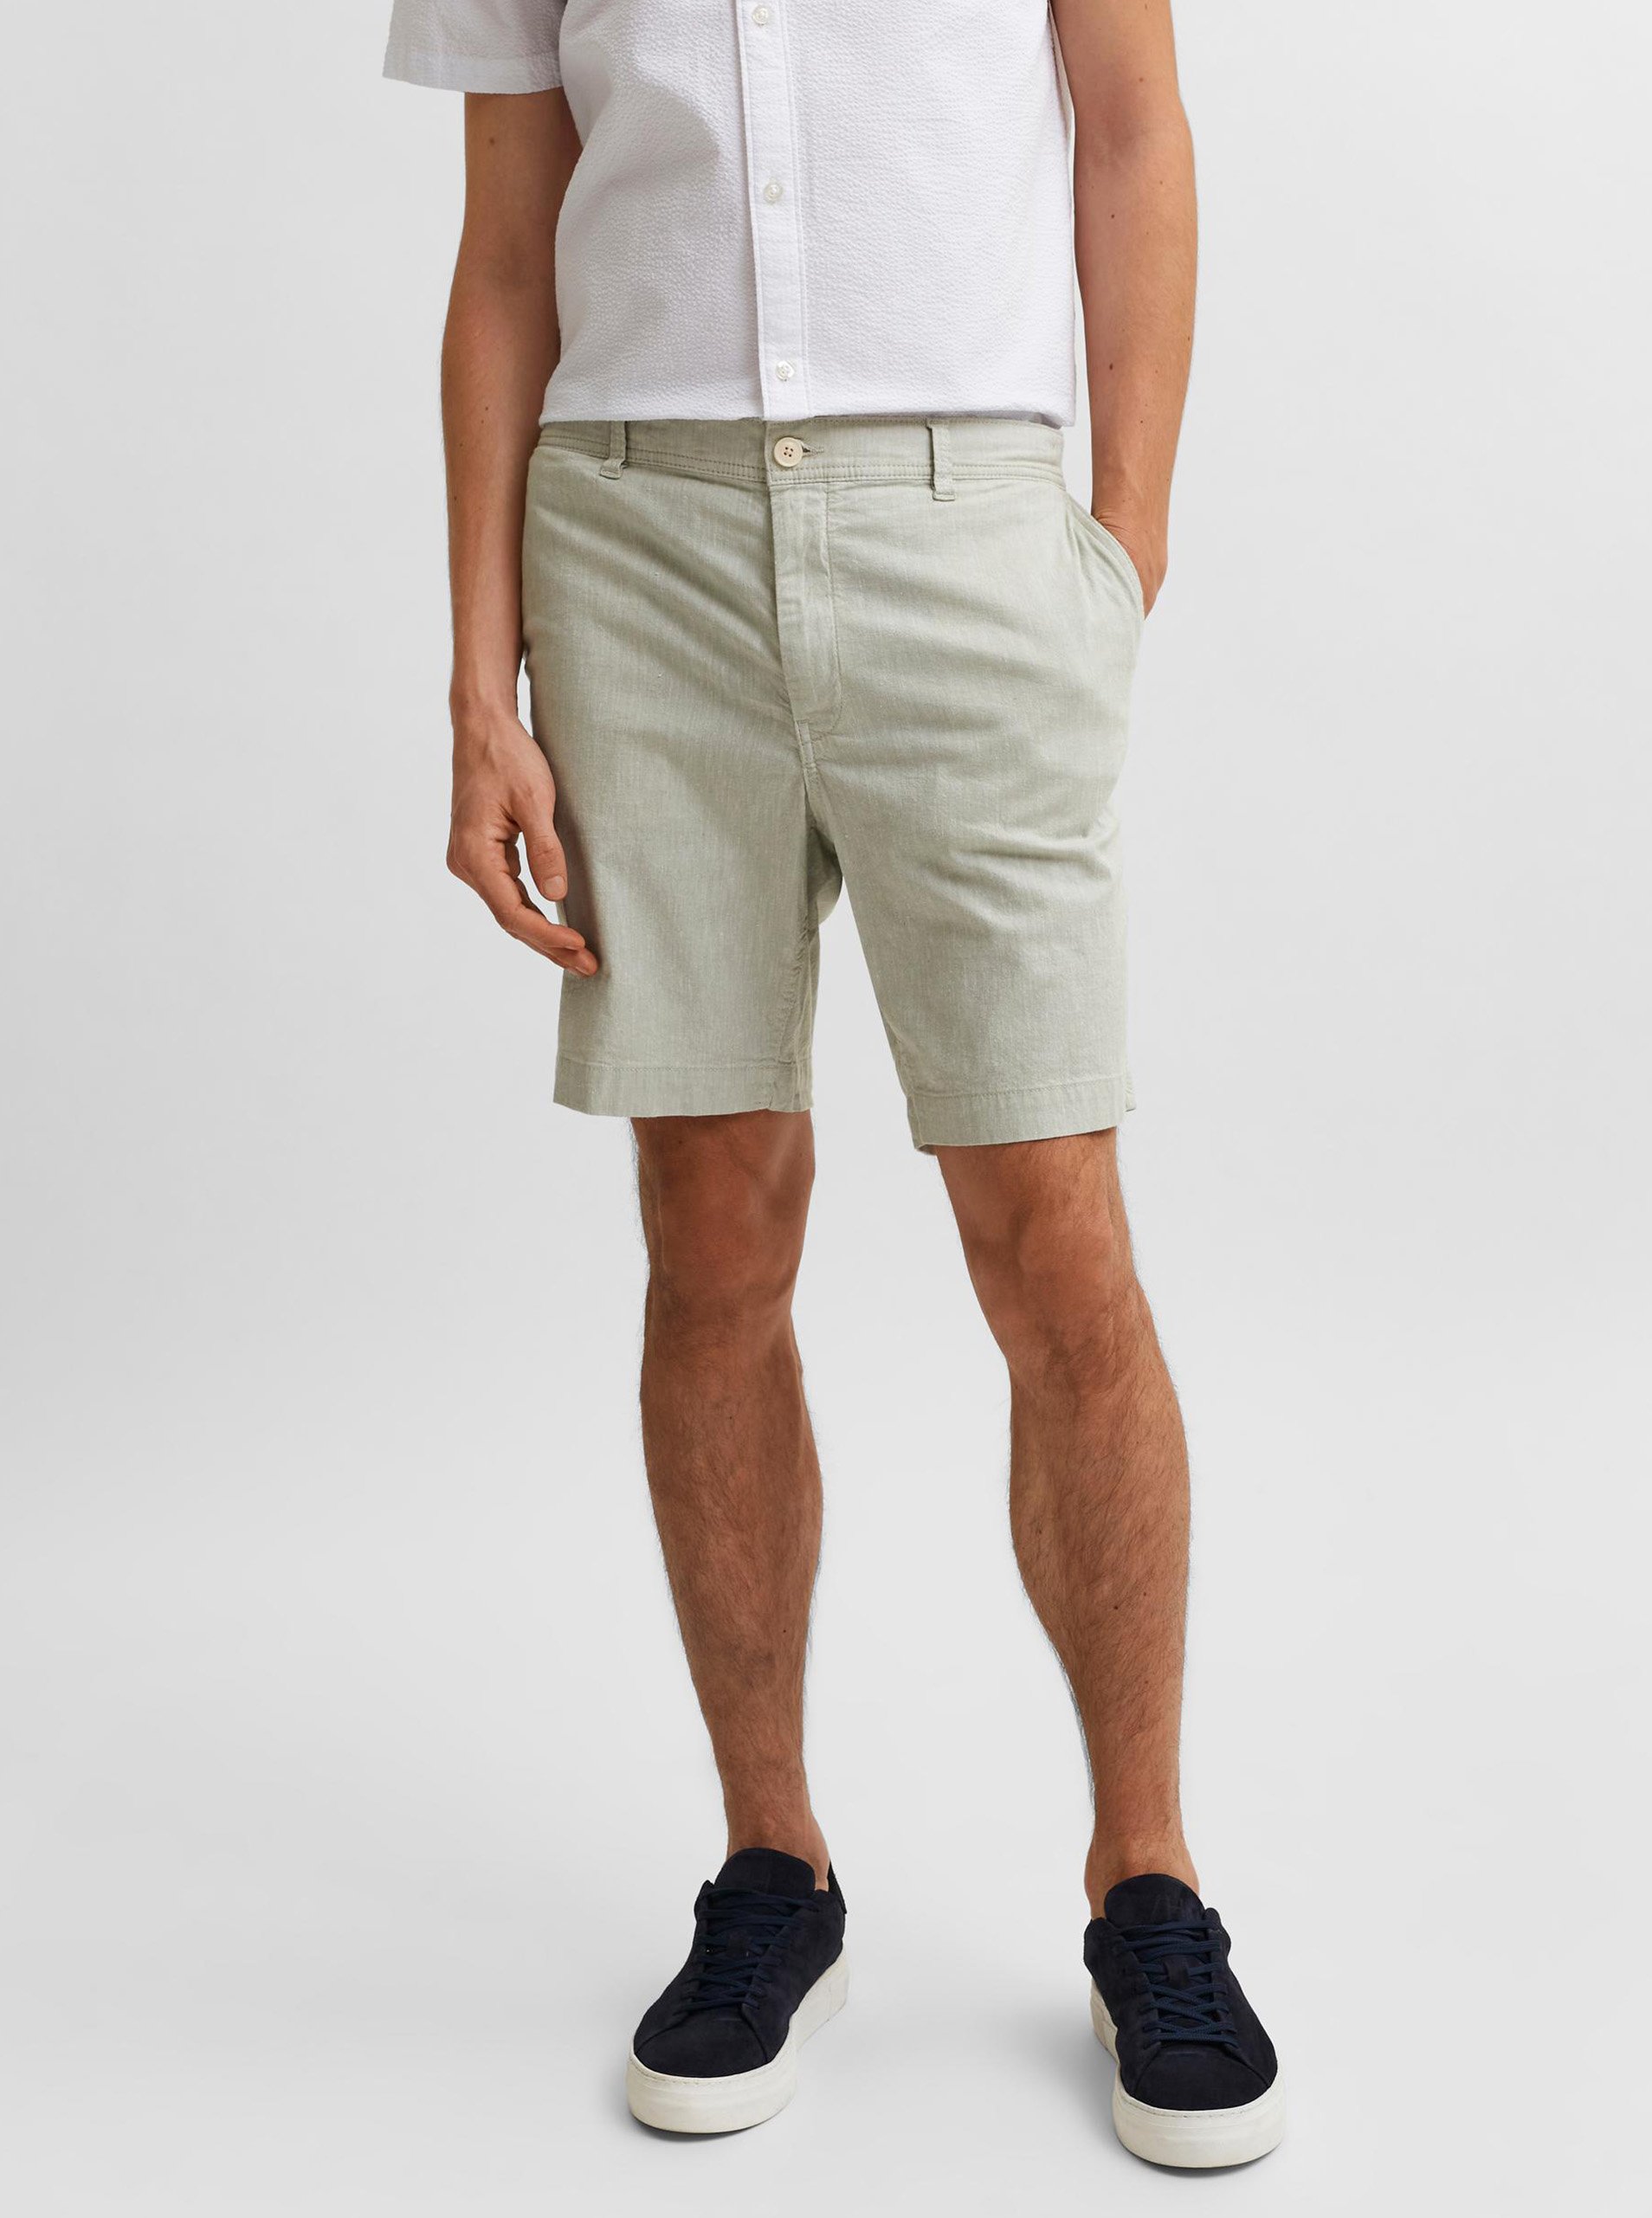 Light Green Brindle Chino Shorts Selected Homme Isac - Men